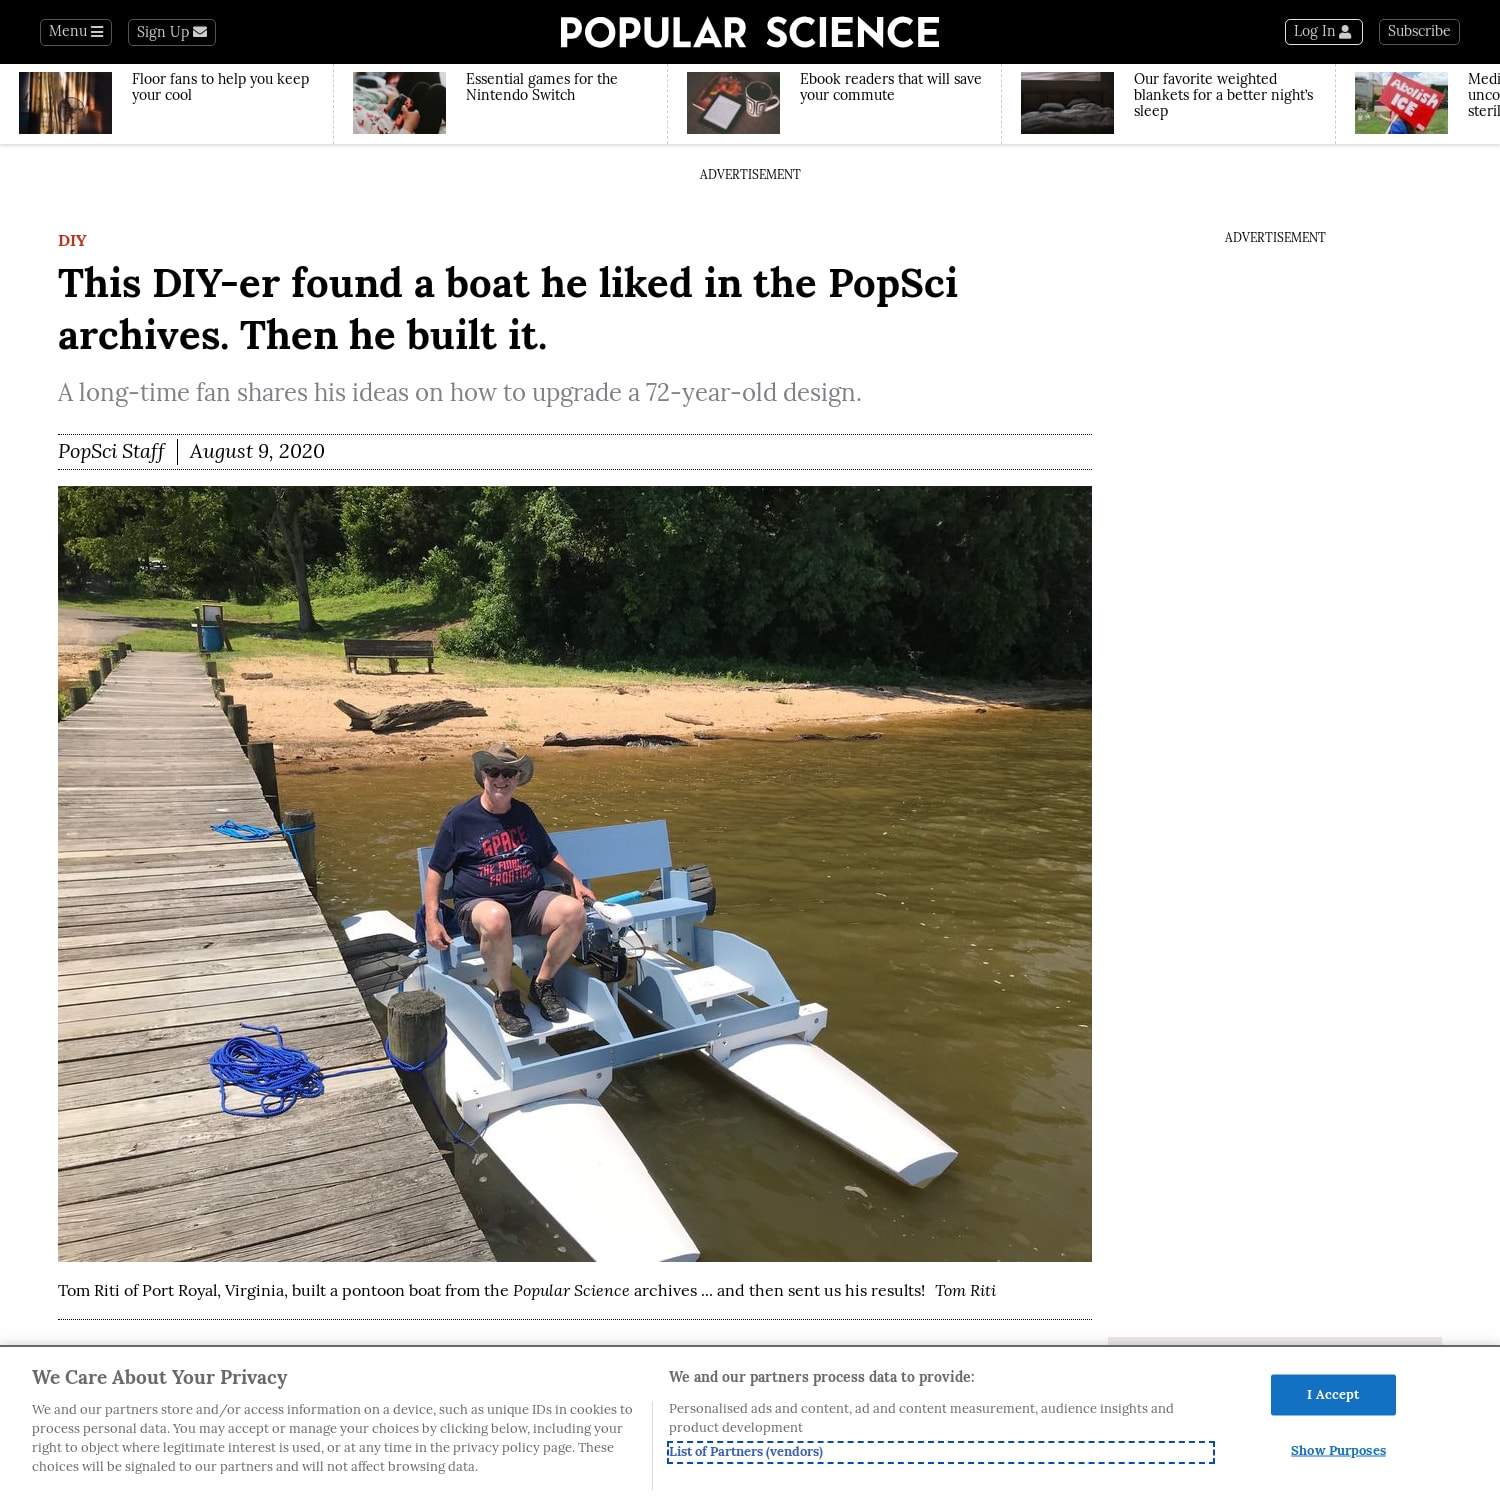 This DIY-er found a boat he liked in the PopSci archives. Then he built it.